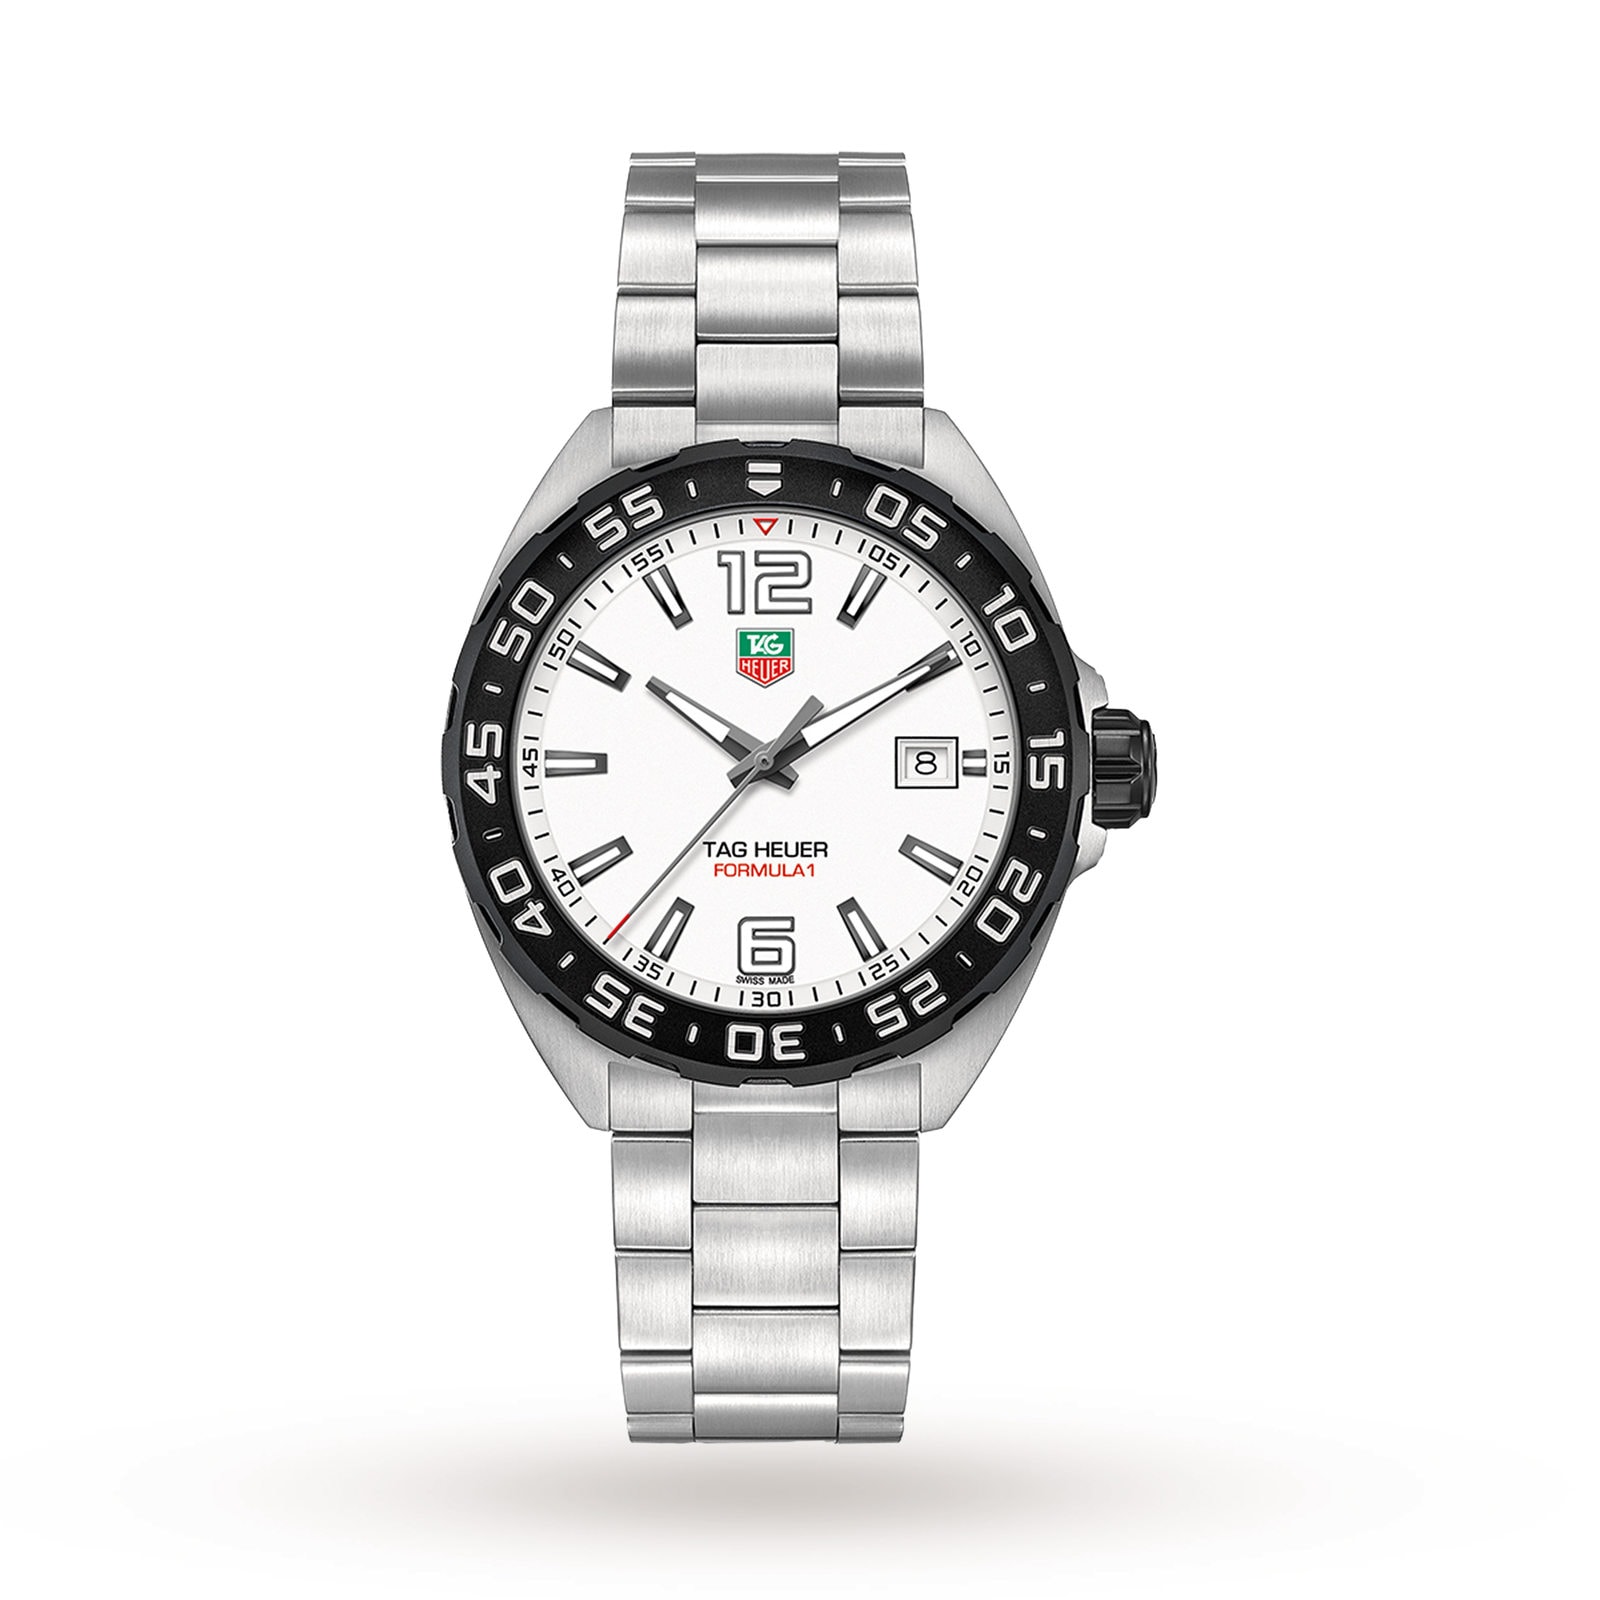 TAG Heuer Formula 1 for Rs.34,100 for sale from a Trusted Seller on Chrono24